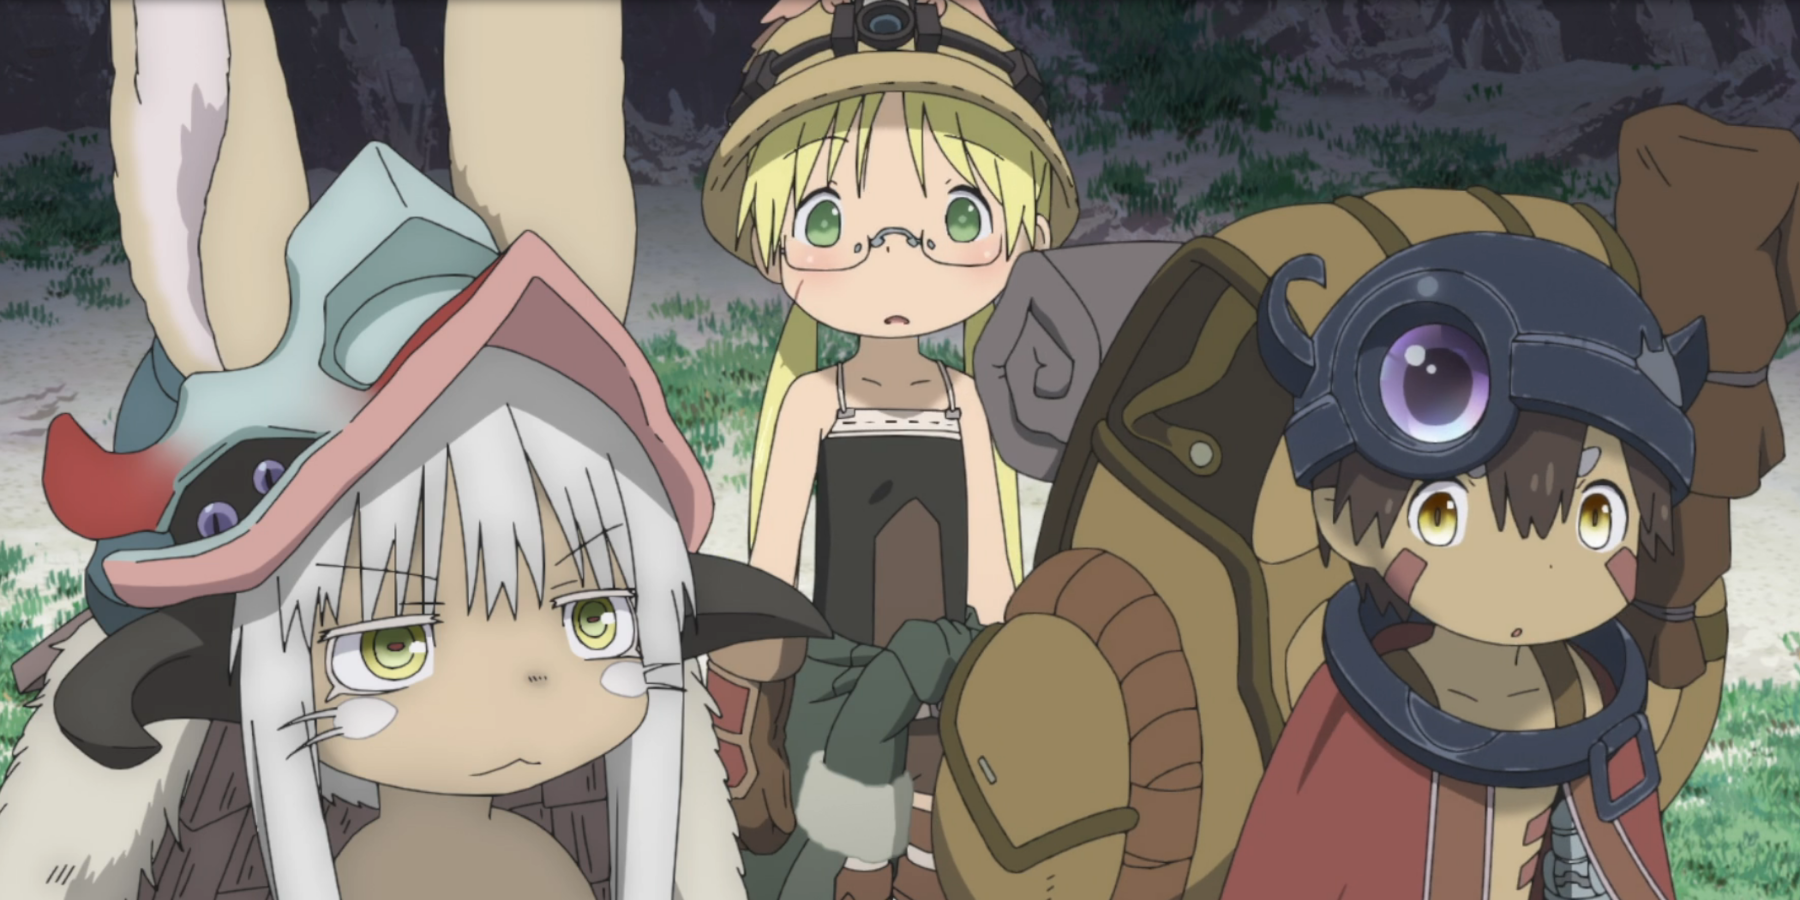 Made in Abyss Season 2 Episode 2